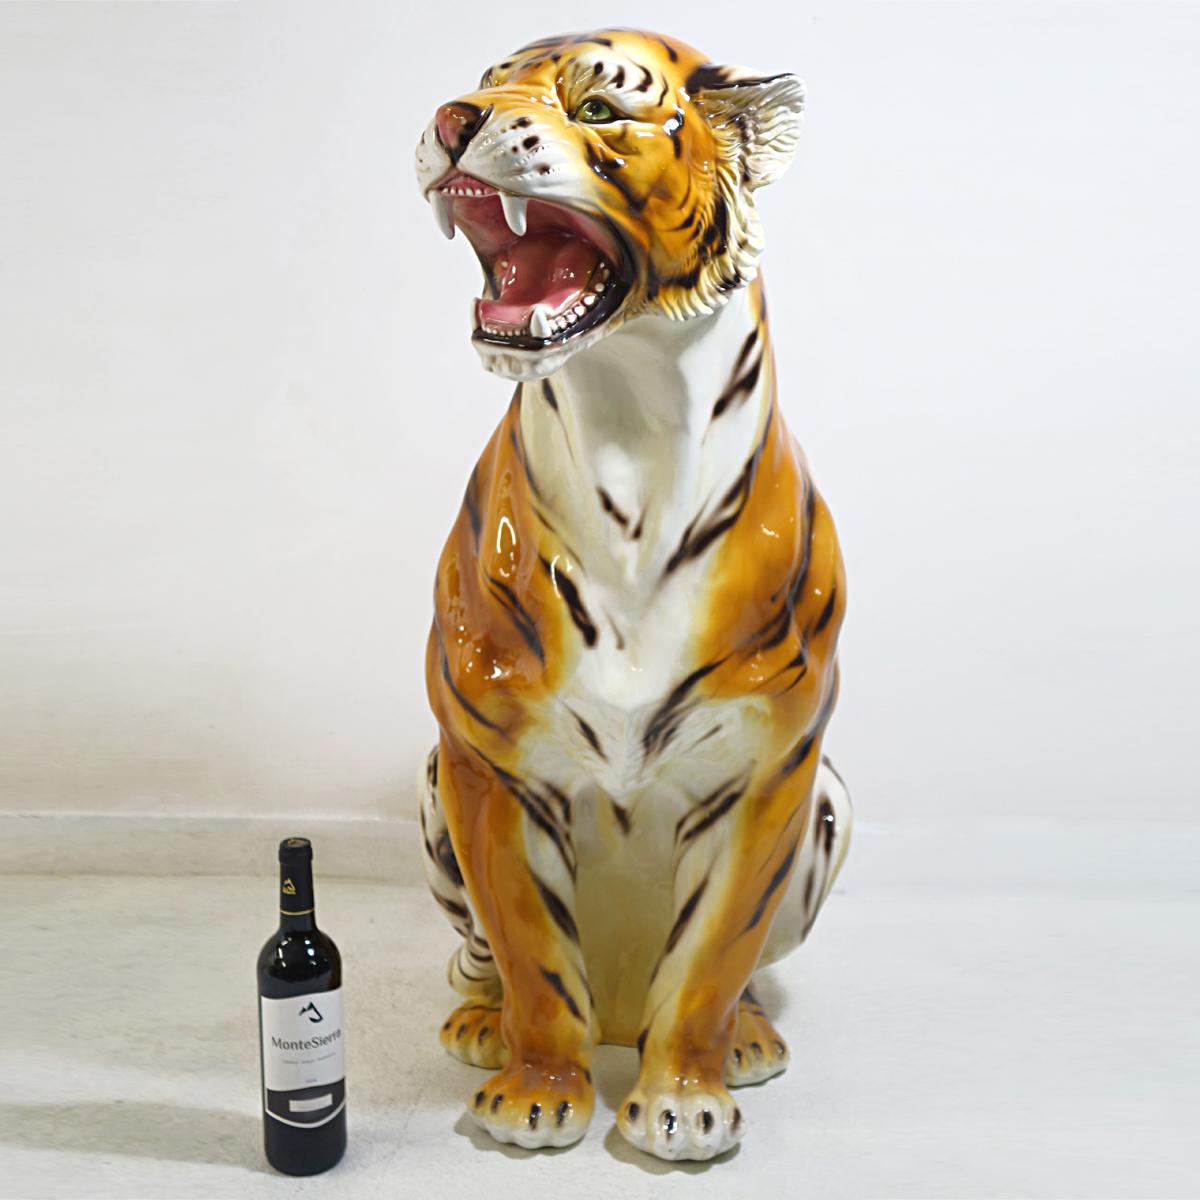 Late 20th Century Big Mid-Century Modern Ceramic Tiger in the Style of Ronzan Marked Made in Italy